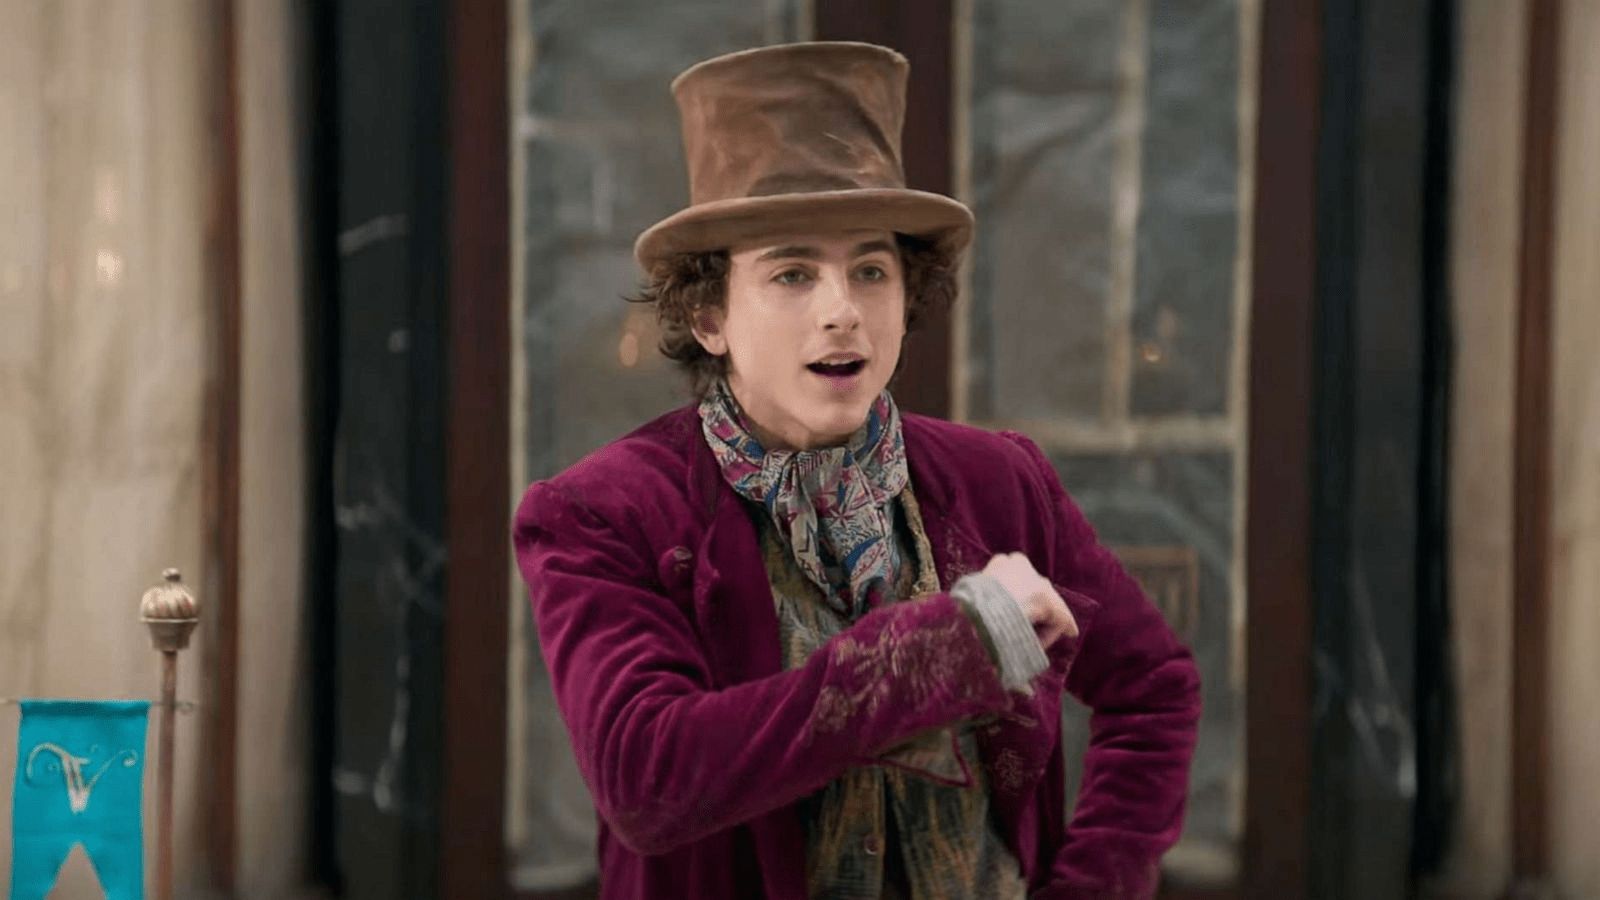 Is the Willy Wonka movie the End of an Iconic Character?